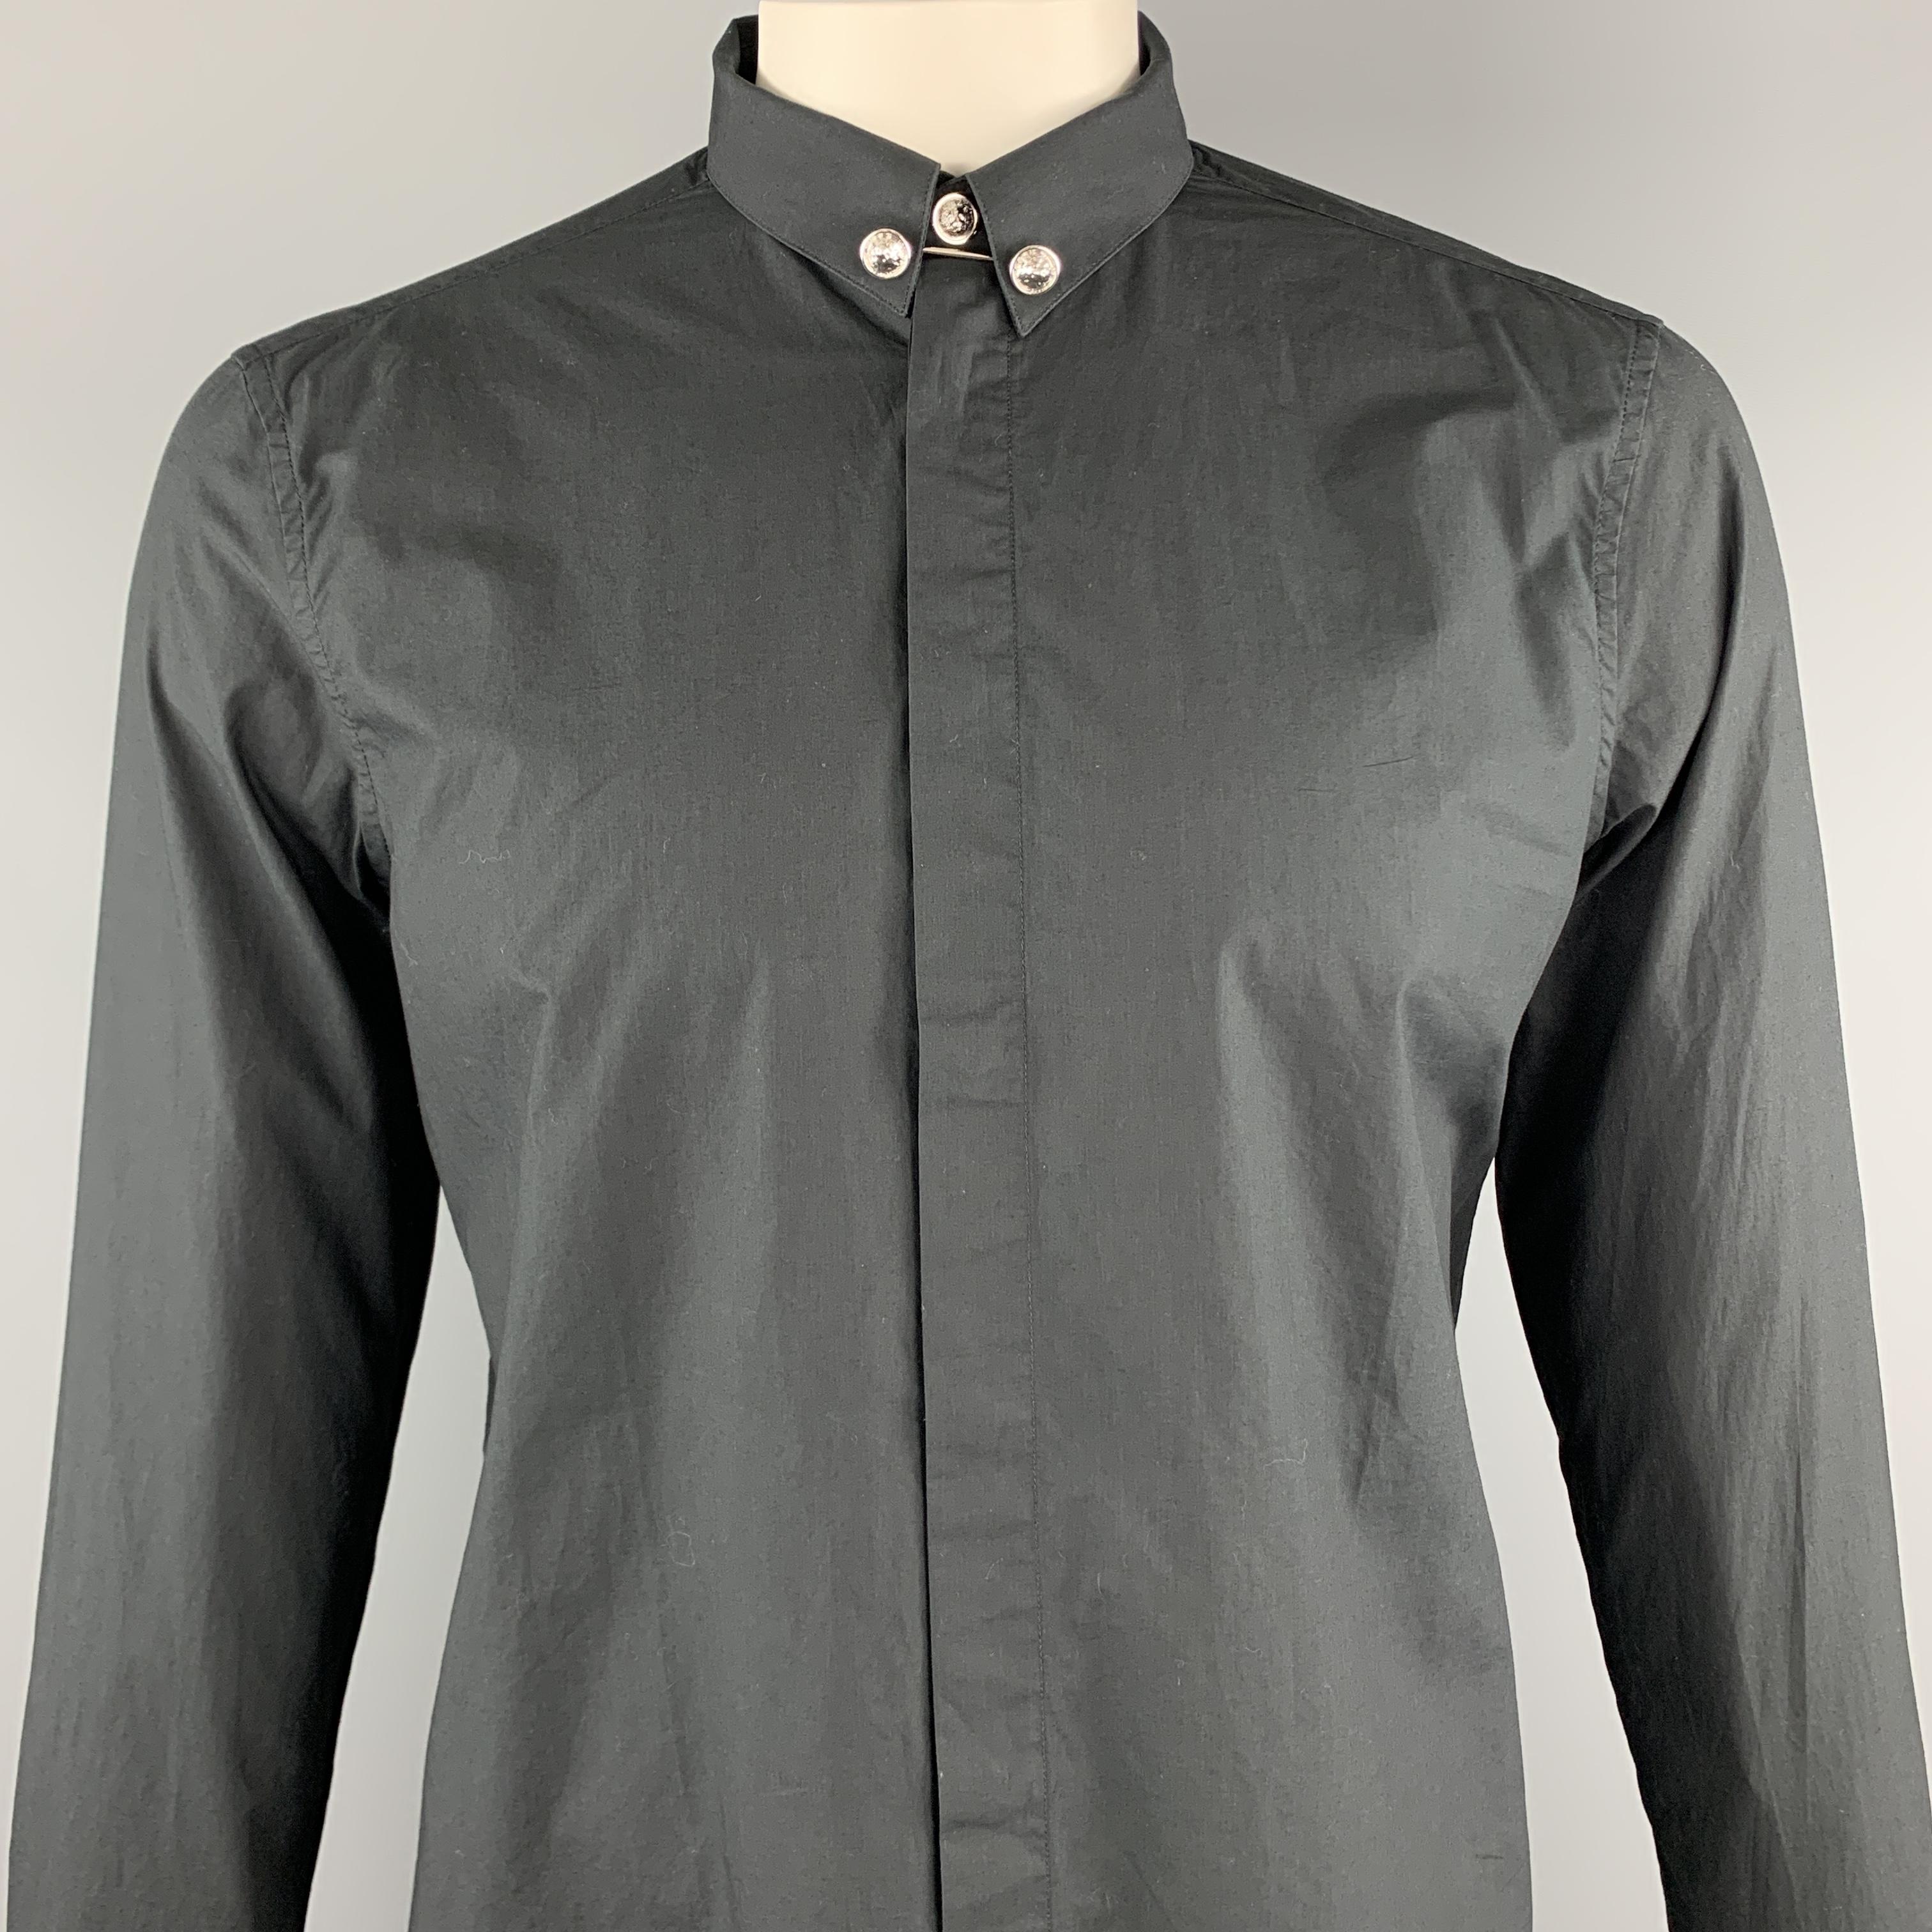 VERSUS by GIANNI VERSACE long sleeve shirt comes in a black cotton featuring a button up style, lion head details, and a hidden buttoned closure. Made in Bulgaria.

New With Tags.
Marked: 50

Measurements:

Shoulder: 16 in. 
Chest: 44 in. 
Sleeve: